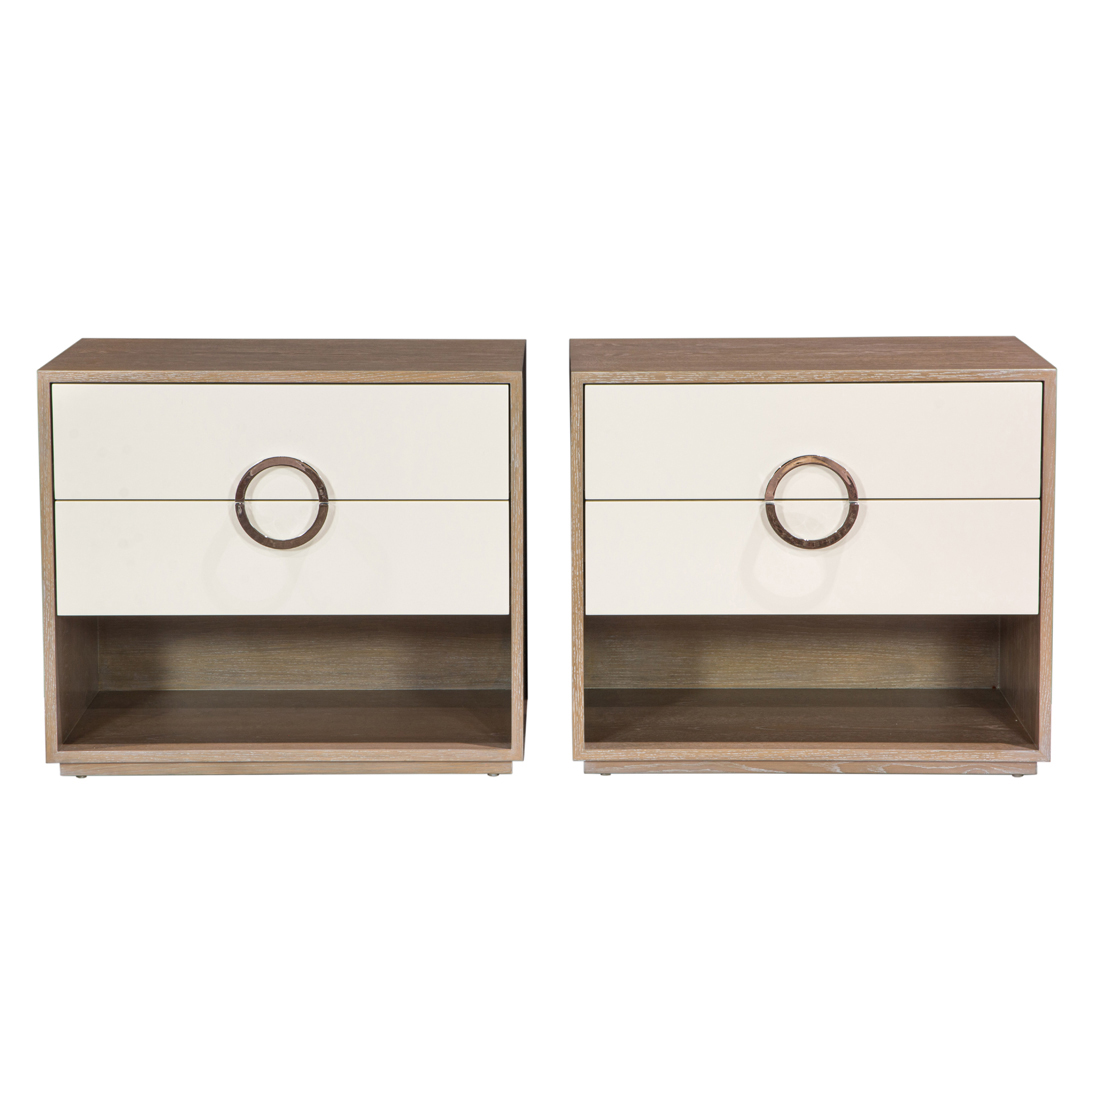 A PAIR OF CONTEMPORARY CREAM LACQUERED 3b42bd